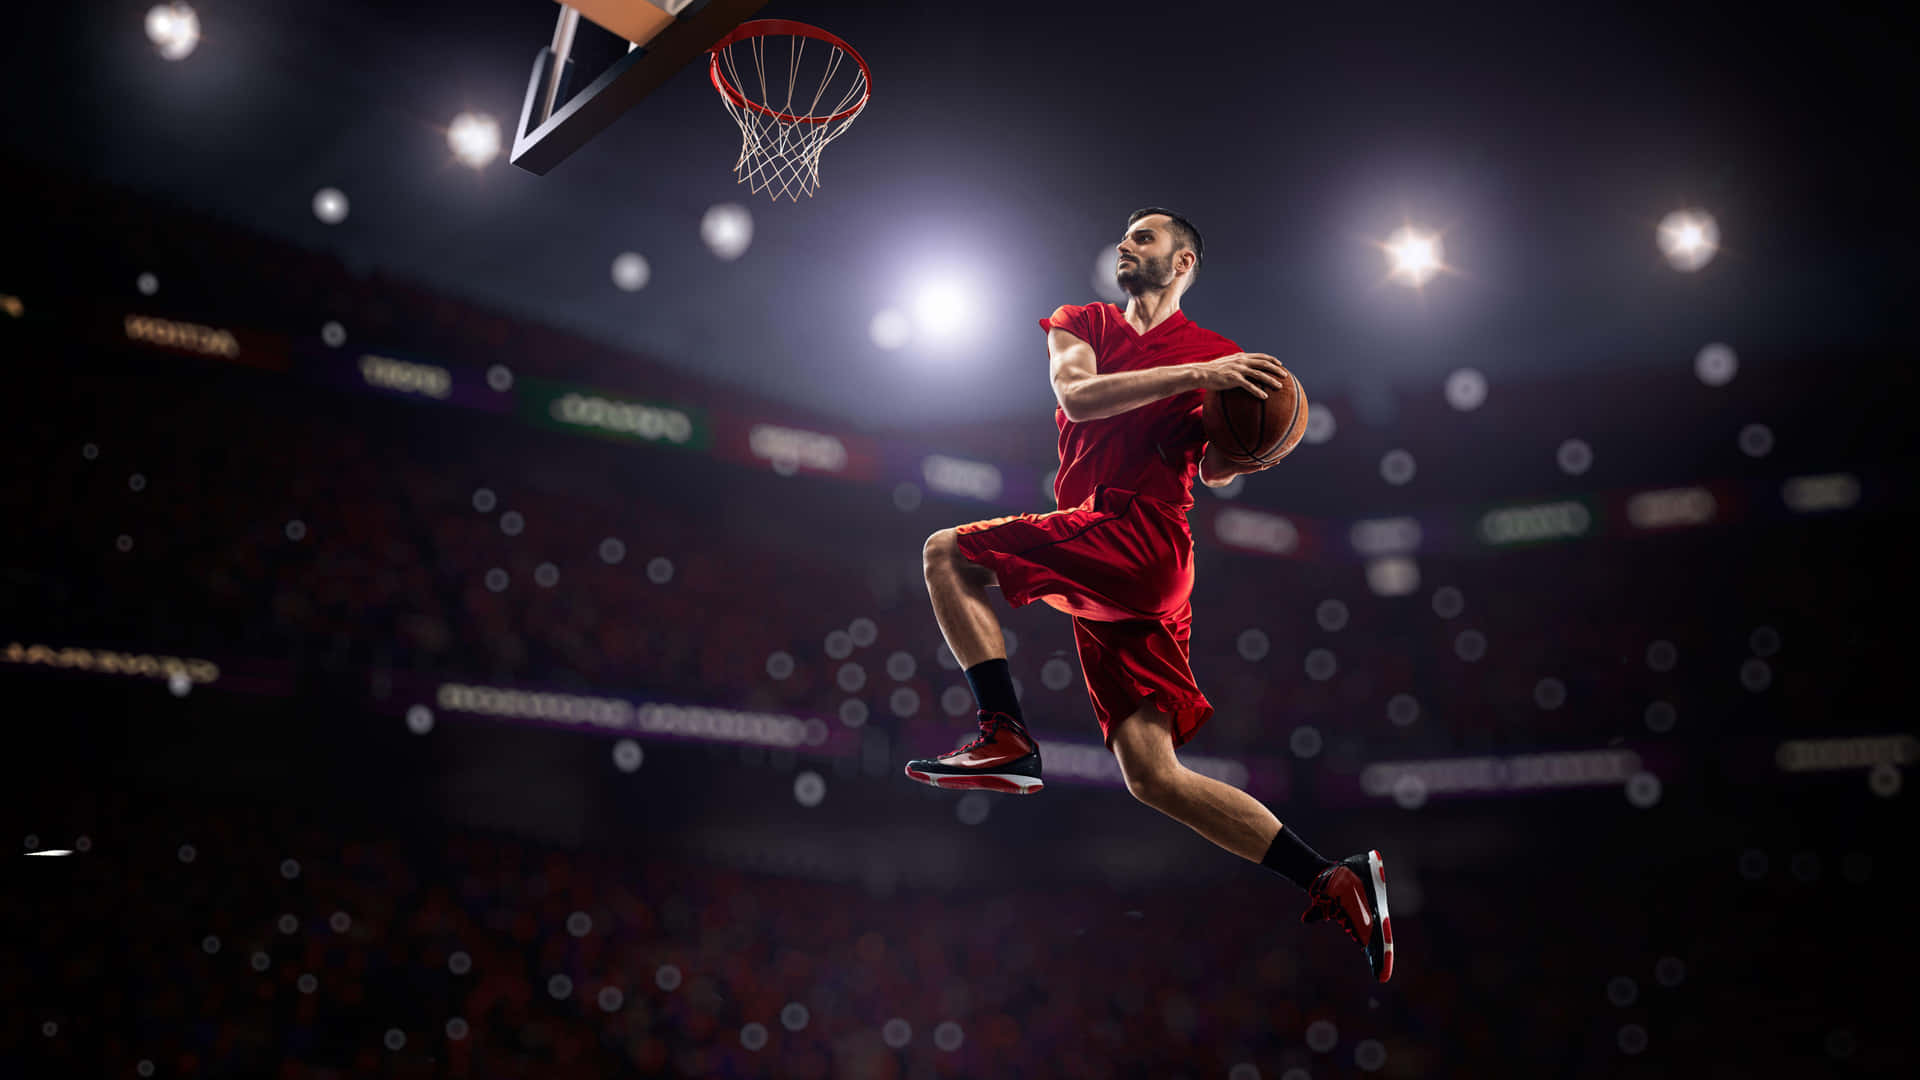 Get ready to take your basketball game to the next level with 4K resolution!